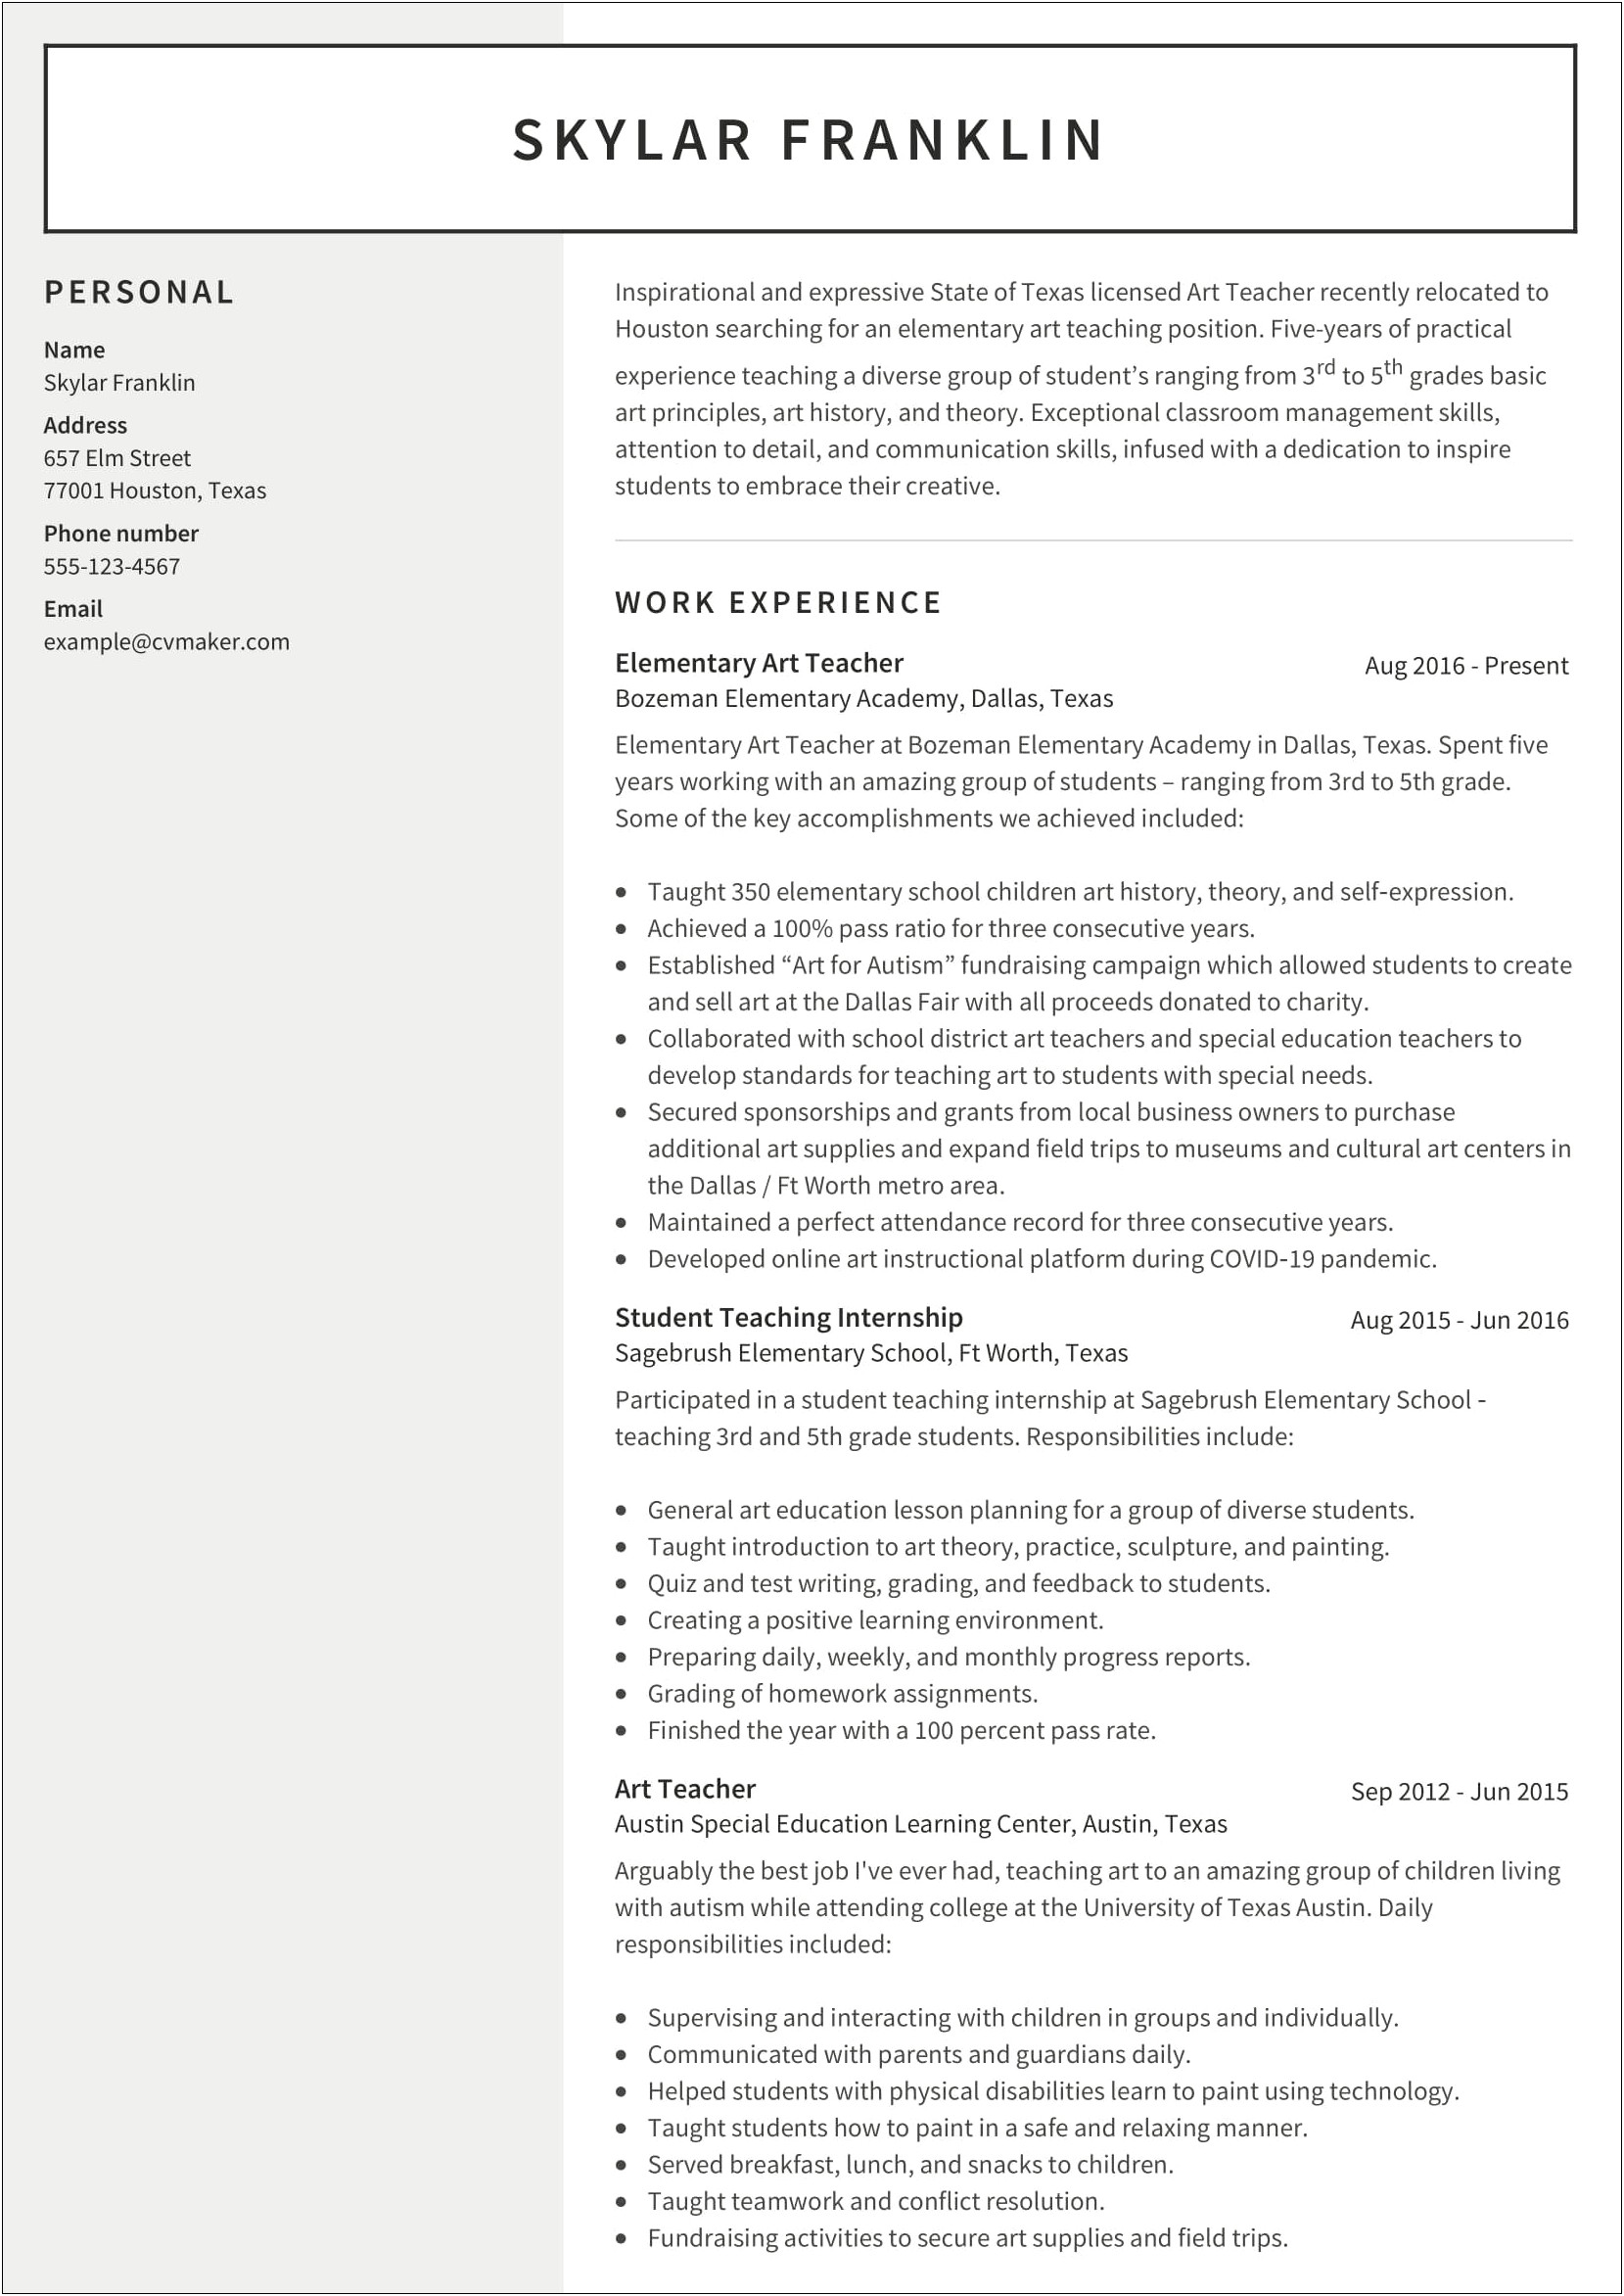 Resume Objective Statement For Jobs In Other State